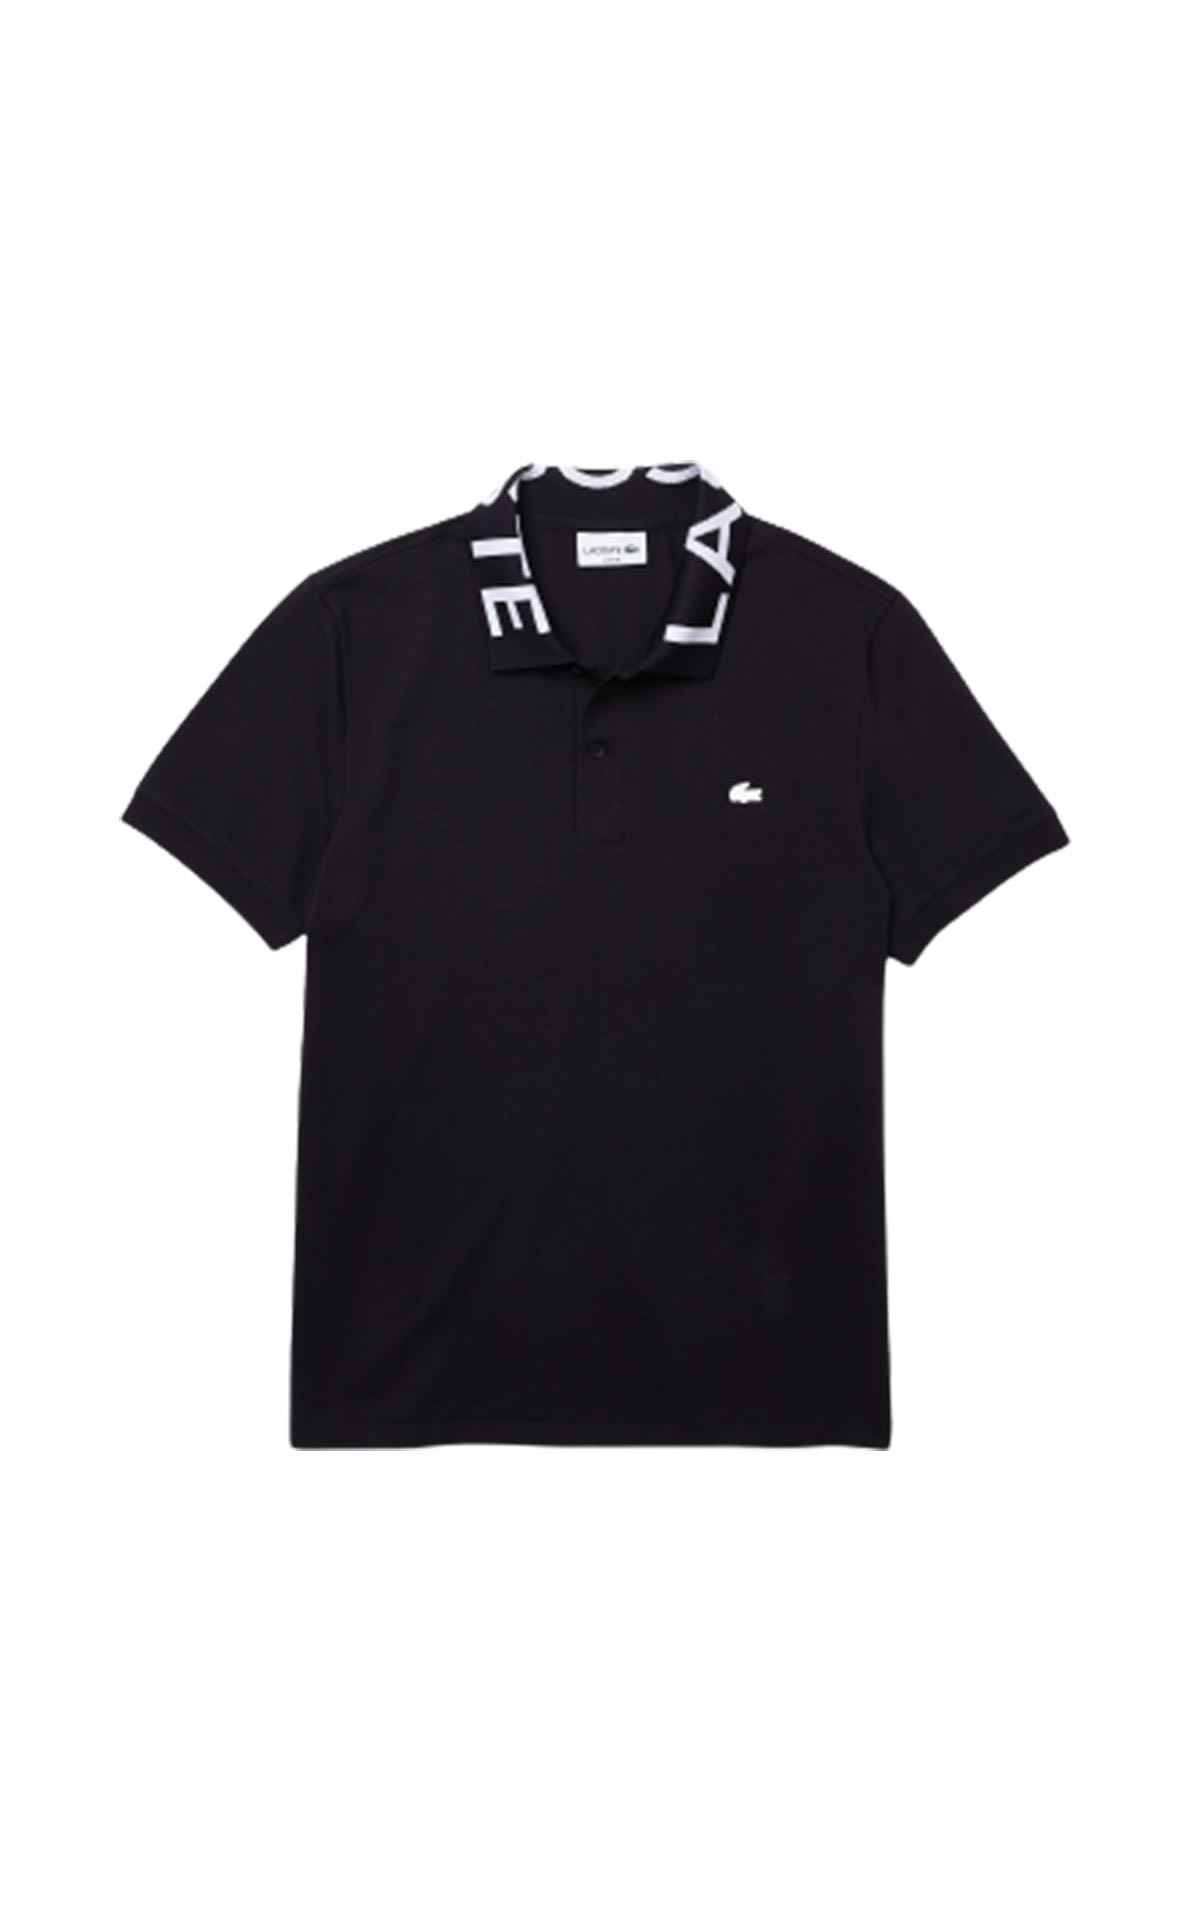 Lacoste Slim fit light breathable pique polo shirt from Bicester Village